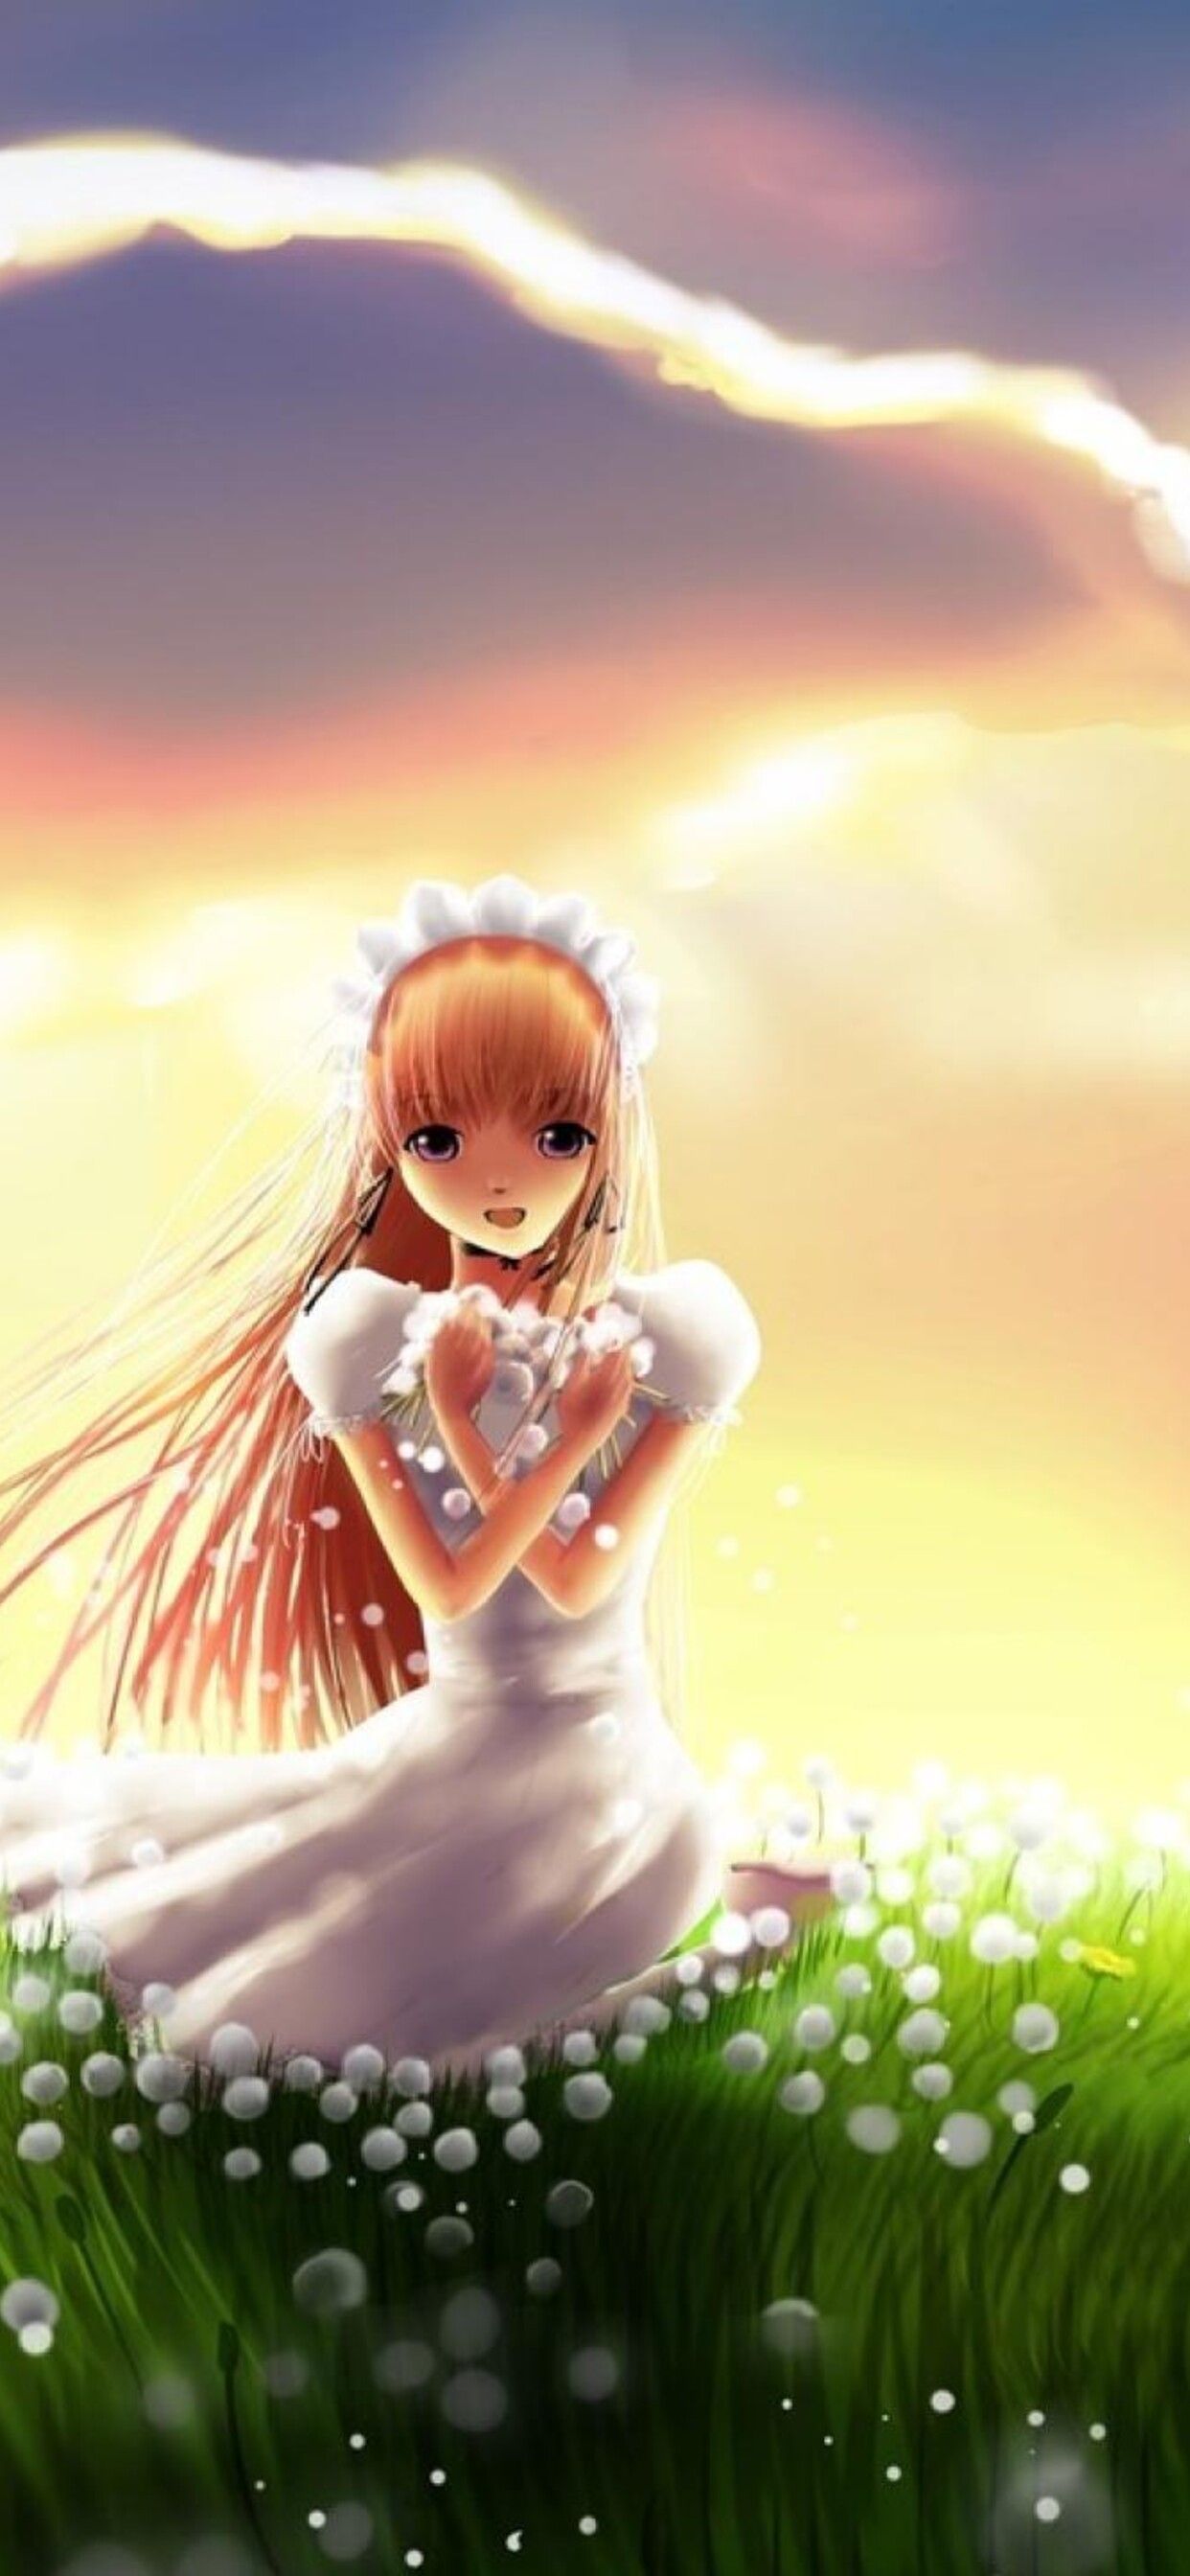 Anime bride on a field full with dandelions